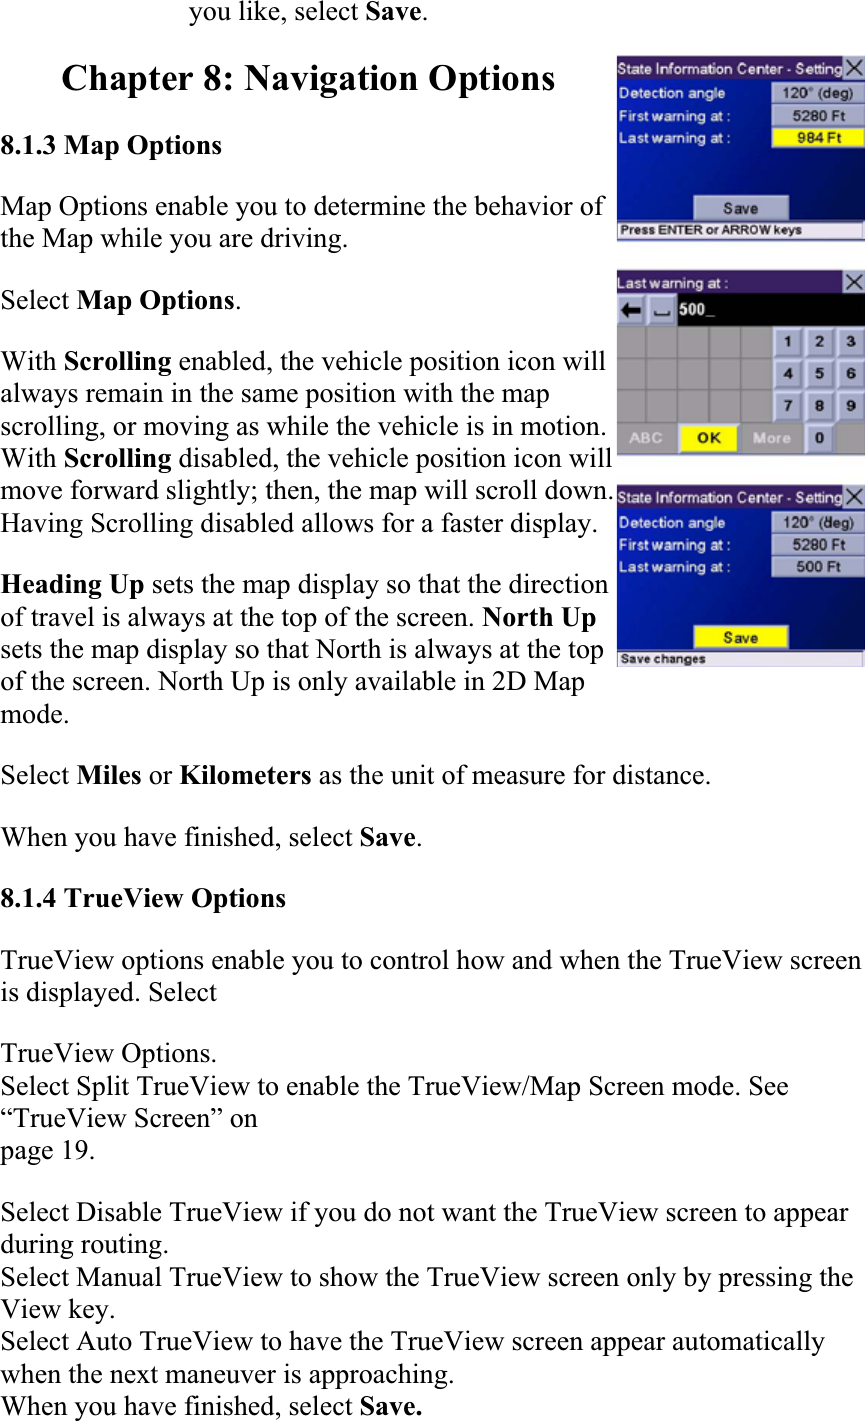 you like, select Save.Chapter 8: Navigation Options 8.1.3 Map OptionsMap Options enable you to determine the behavior of the Map while you are driving.  Select Map Options.With Scrolling enabled, the vehicle position icon will always remain in the same position with the map scrolling, or moving as while the vehicle is in motion. With Scrolling disabled, the vehicle position icon will move forward slightly; then, the map will scroll down. Having Scrolling disabled allows for a faster display.Heading Up sets the map display so that the direction of travel is always at the top of the screen. North Upsets the map display so that North is always at the top of the screen. North Up is only available in 2D Map mode.  Select Miles or Kilometers as the unit of measure for distance.  When you have finished, select Save.8.1.4 TrueView Options  TrueView options enable you to control how and when the TrueView screen is displayed. Select  TrueView Options. Select Split TrueView to enable the TrueView/Map Screen mode. See “TrueView Screen” onpage 19. Select Disable TrueView if you do not want the TrueView screen to appear during routing. Select Manual TrueView to show the TrueView screen only by pressing the View key. Select Auto TrueView to have the TrueView screen appear automatically when the next maneuver is approaching. When you have finished, select Save. 